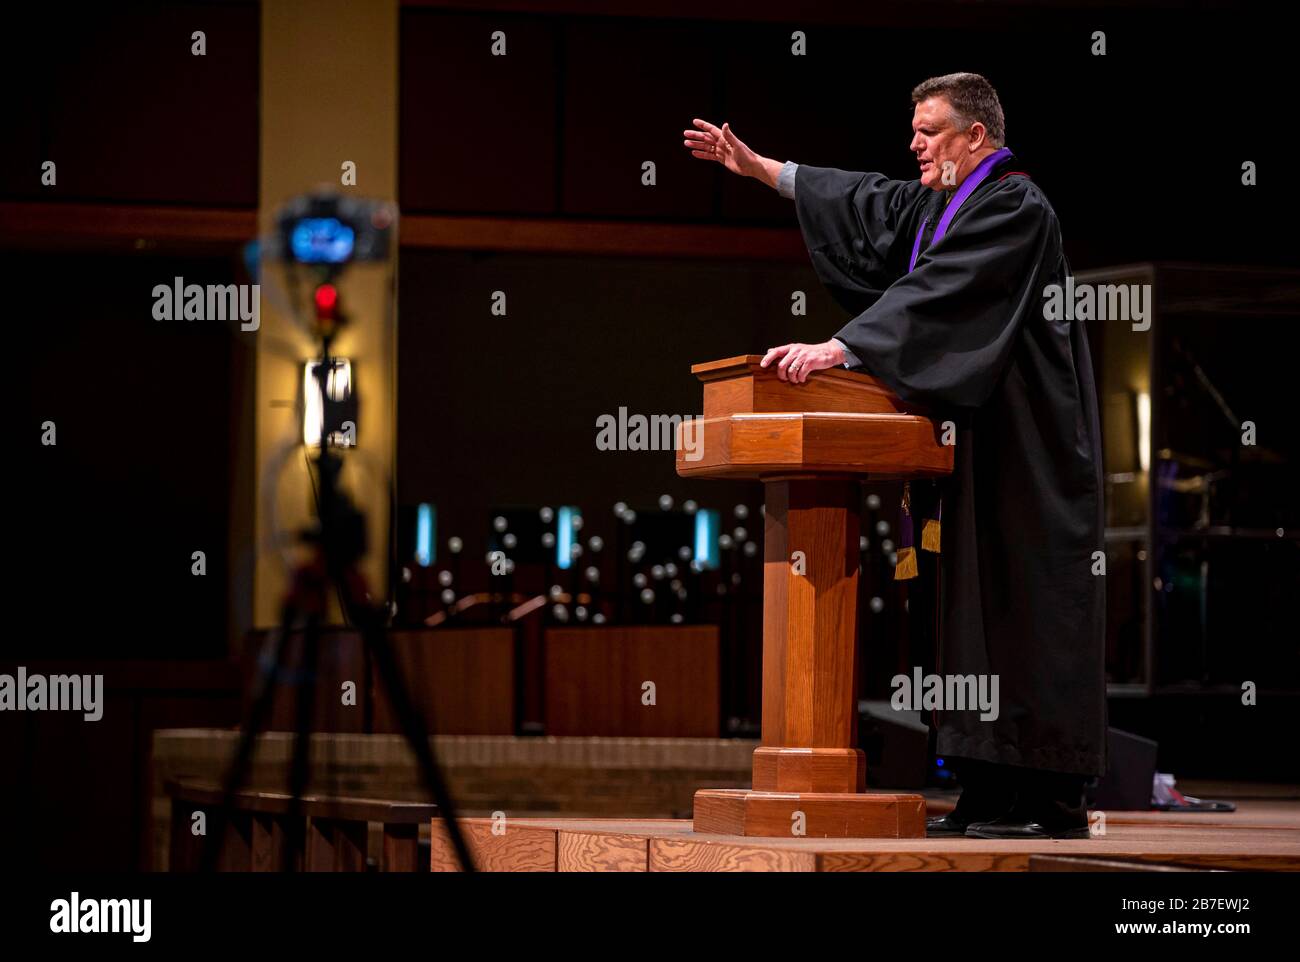 Mar 15, 2020; Springfield, IL, USA; Rev. Roger Grimmett delivers his message to an empty sanctuary and a camera crew for First United Methodist Church's Sunday morning service for the first time due to restrictions of large gatherings because of COVID-19, Sunday, March 15, 2020, in Springfield, Ill. First United Methodist Church live streamed their 9 a.m. traditional service as well as their 10:30 a.m. contemporary service on the church's Facebook page because of the restrictions. It's the first time the church has closed to corporate worship since 1918 at the height of the flu epidemic. Man Stock Photo